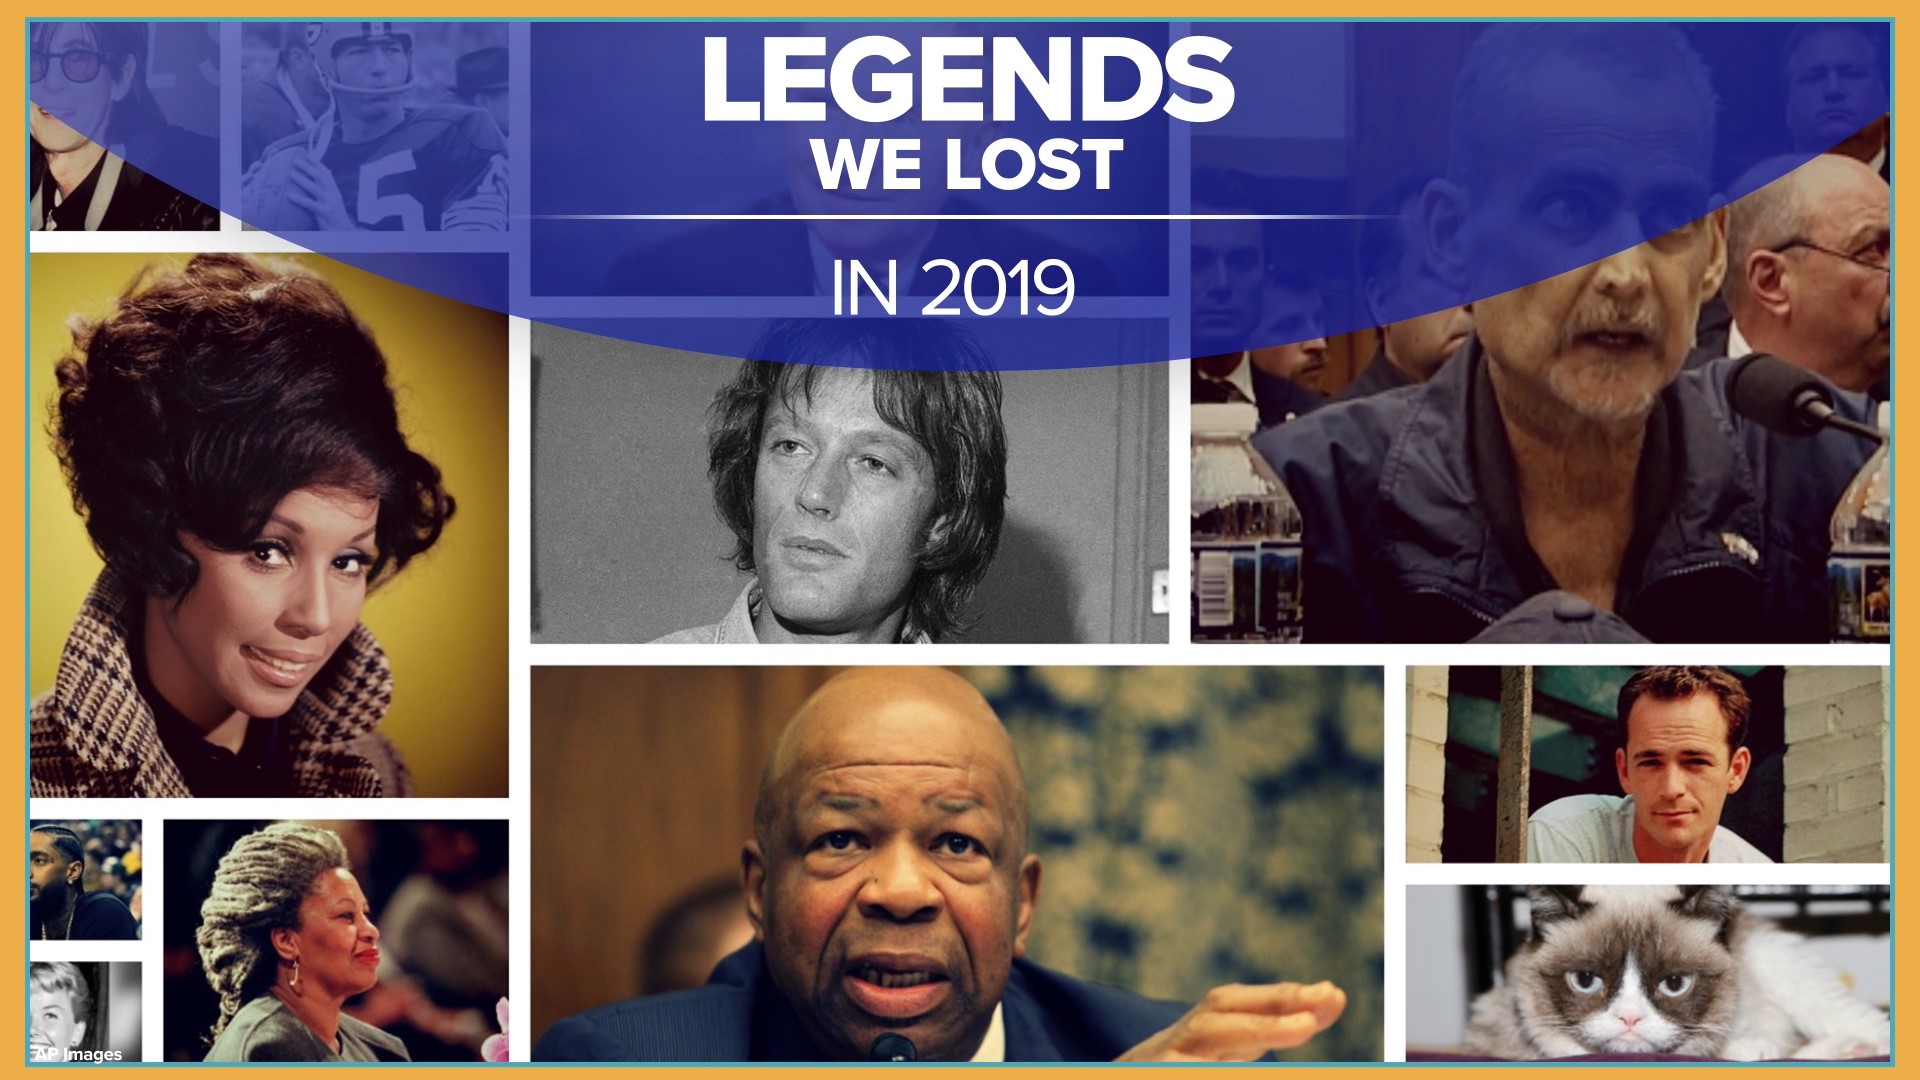 Remembering some of the newsmakers, sports legends and entertainment stars we lost in 2019.